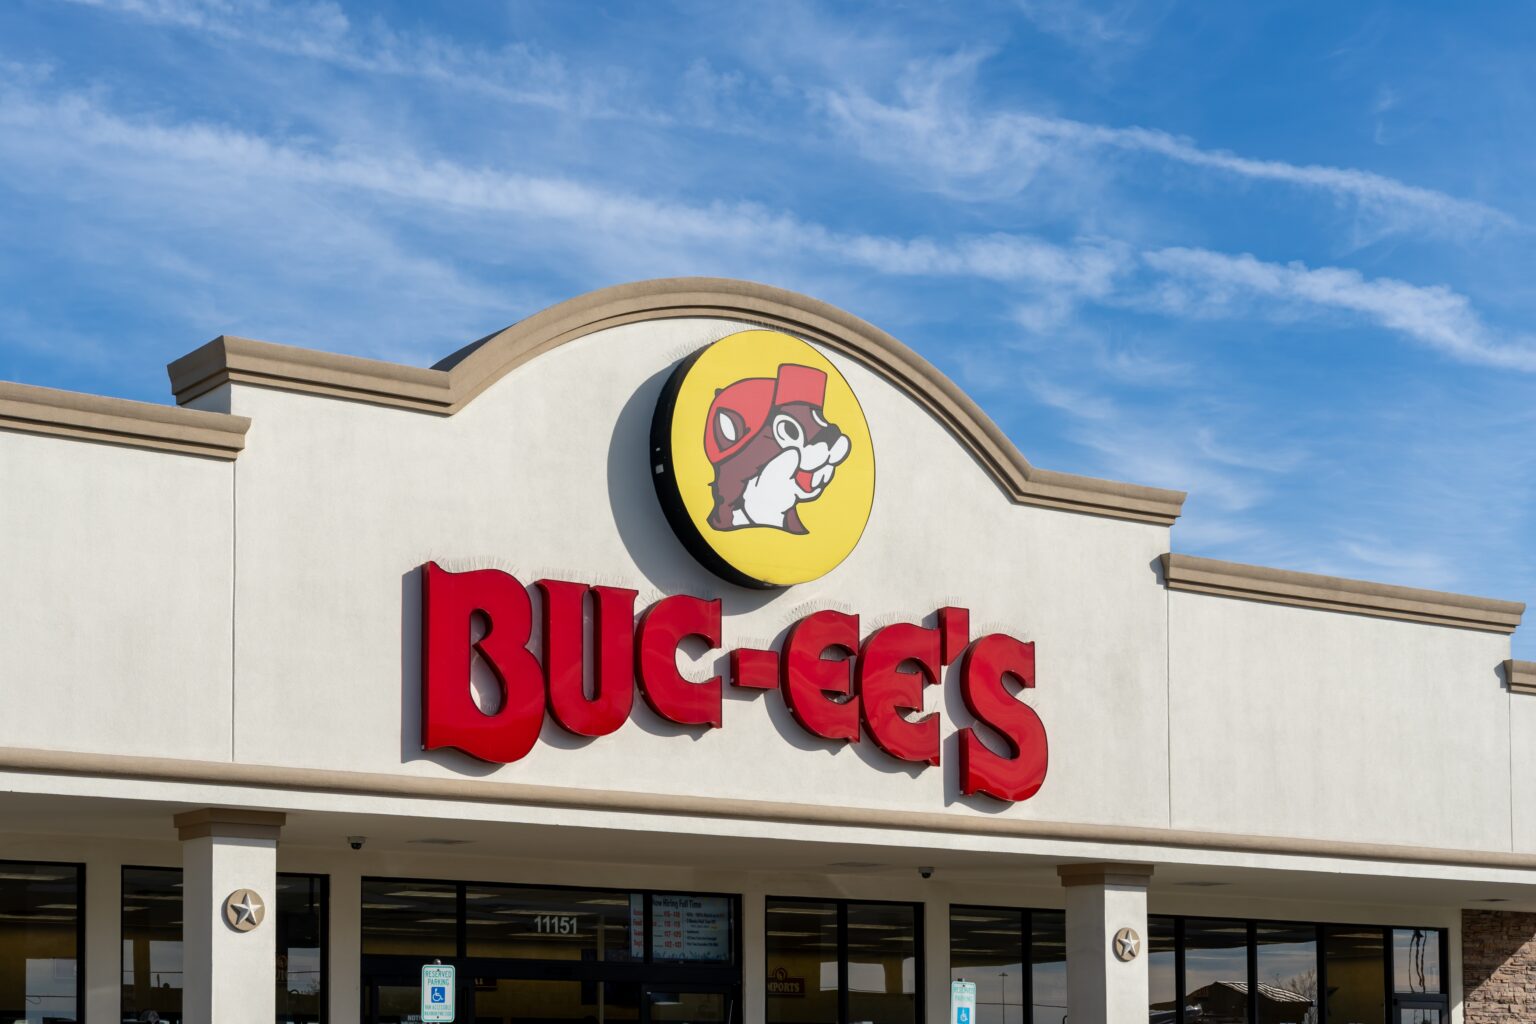 Logo sign above the entrance of a Buc-ee's store